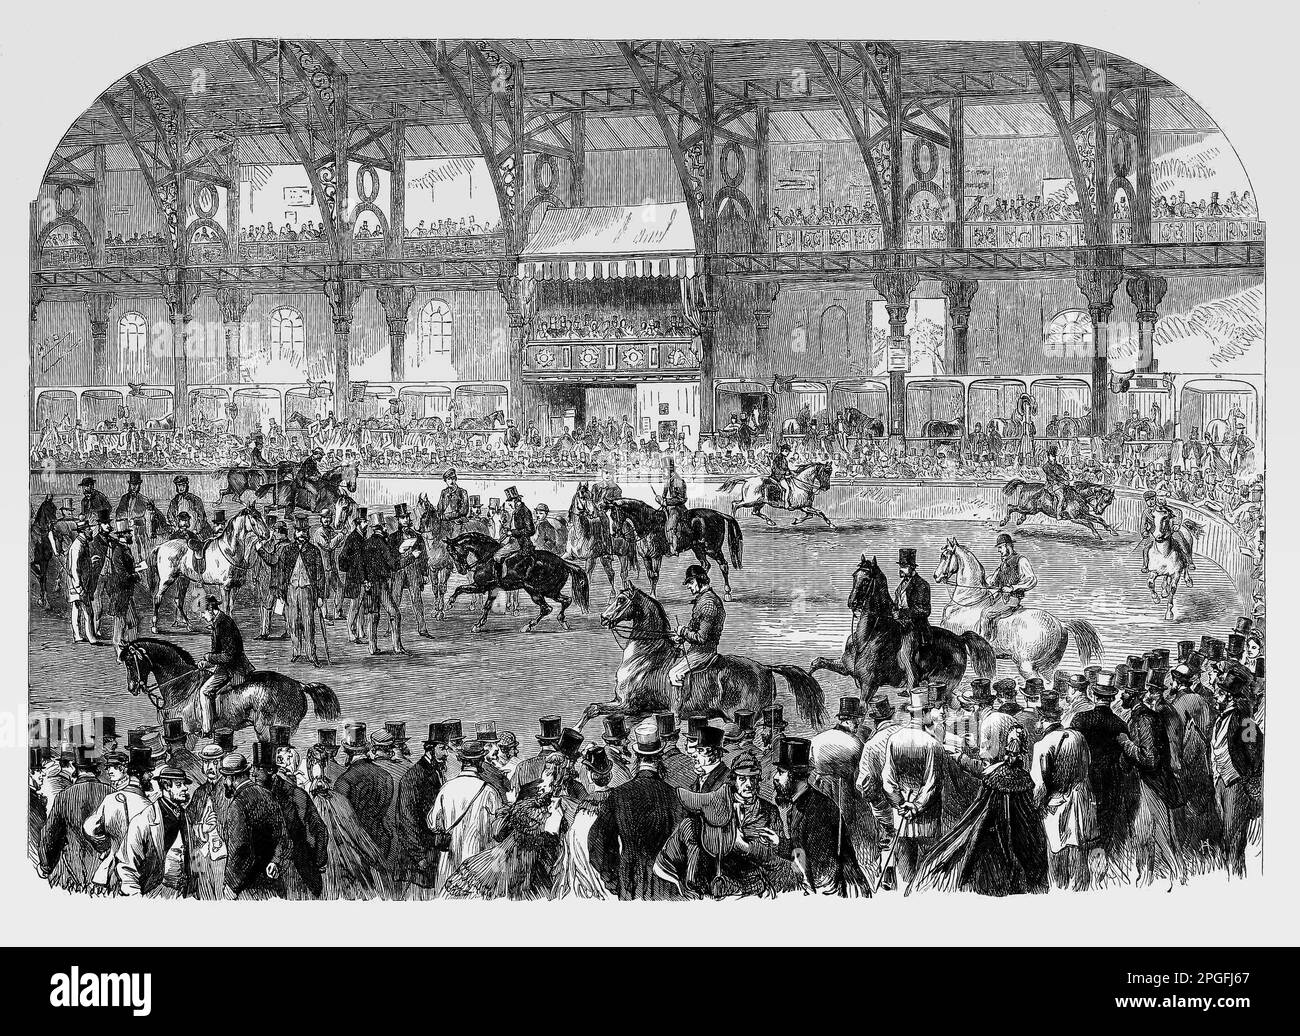 The 1864 Horse Show in the Agricultural Hall, Islington,  established in 1860, to provide a suitable building for the exhibition of agricultural implements and other aspects of country life. Stock Photo